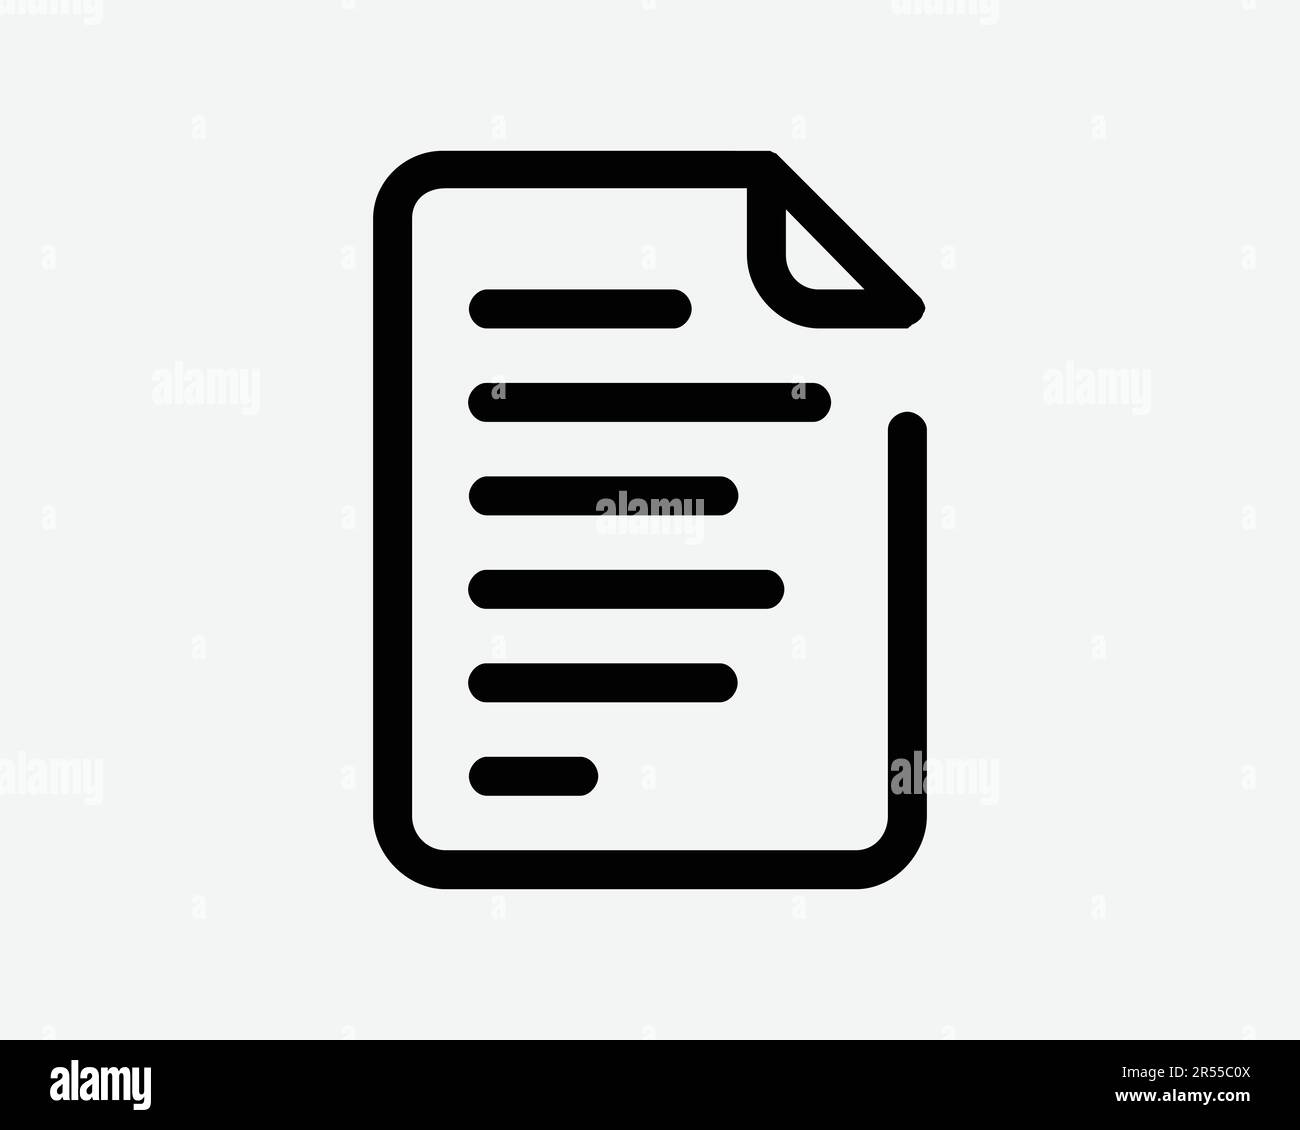 Document Icon. File Paper Folder Note Contract Message Sheet Archive Outline Shape Sign Symbol Black Artwork Graphic Illustration Clipart EPS Vector Stock Vector